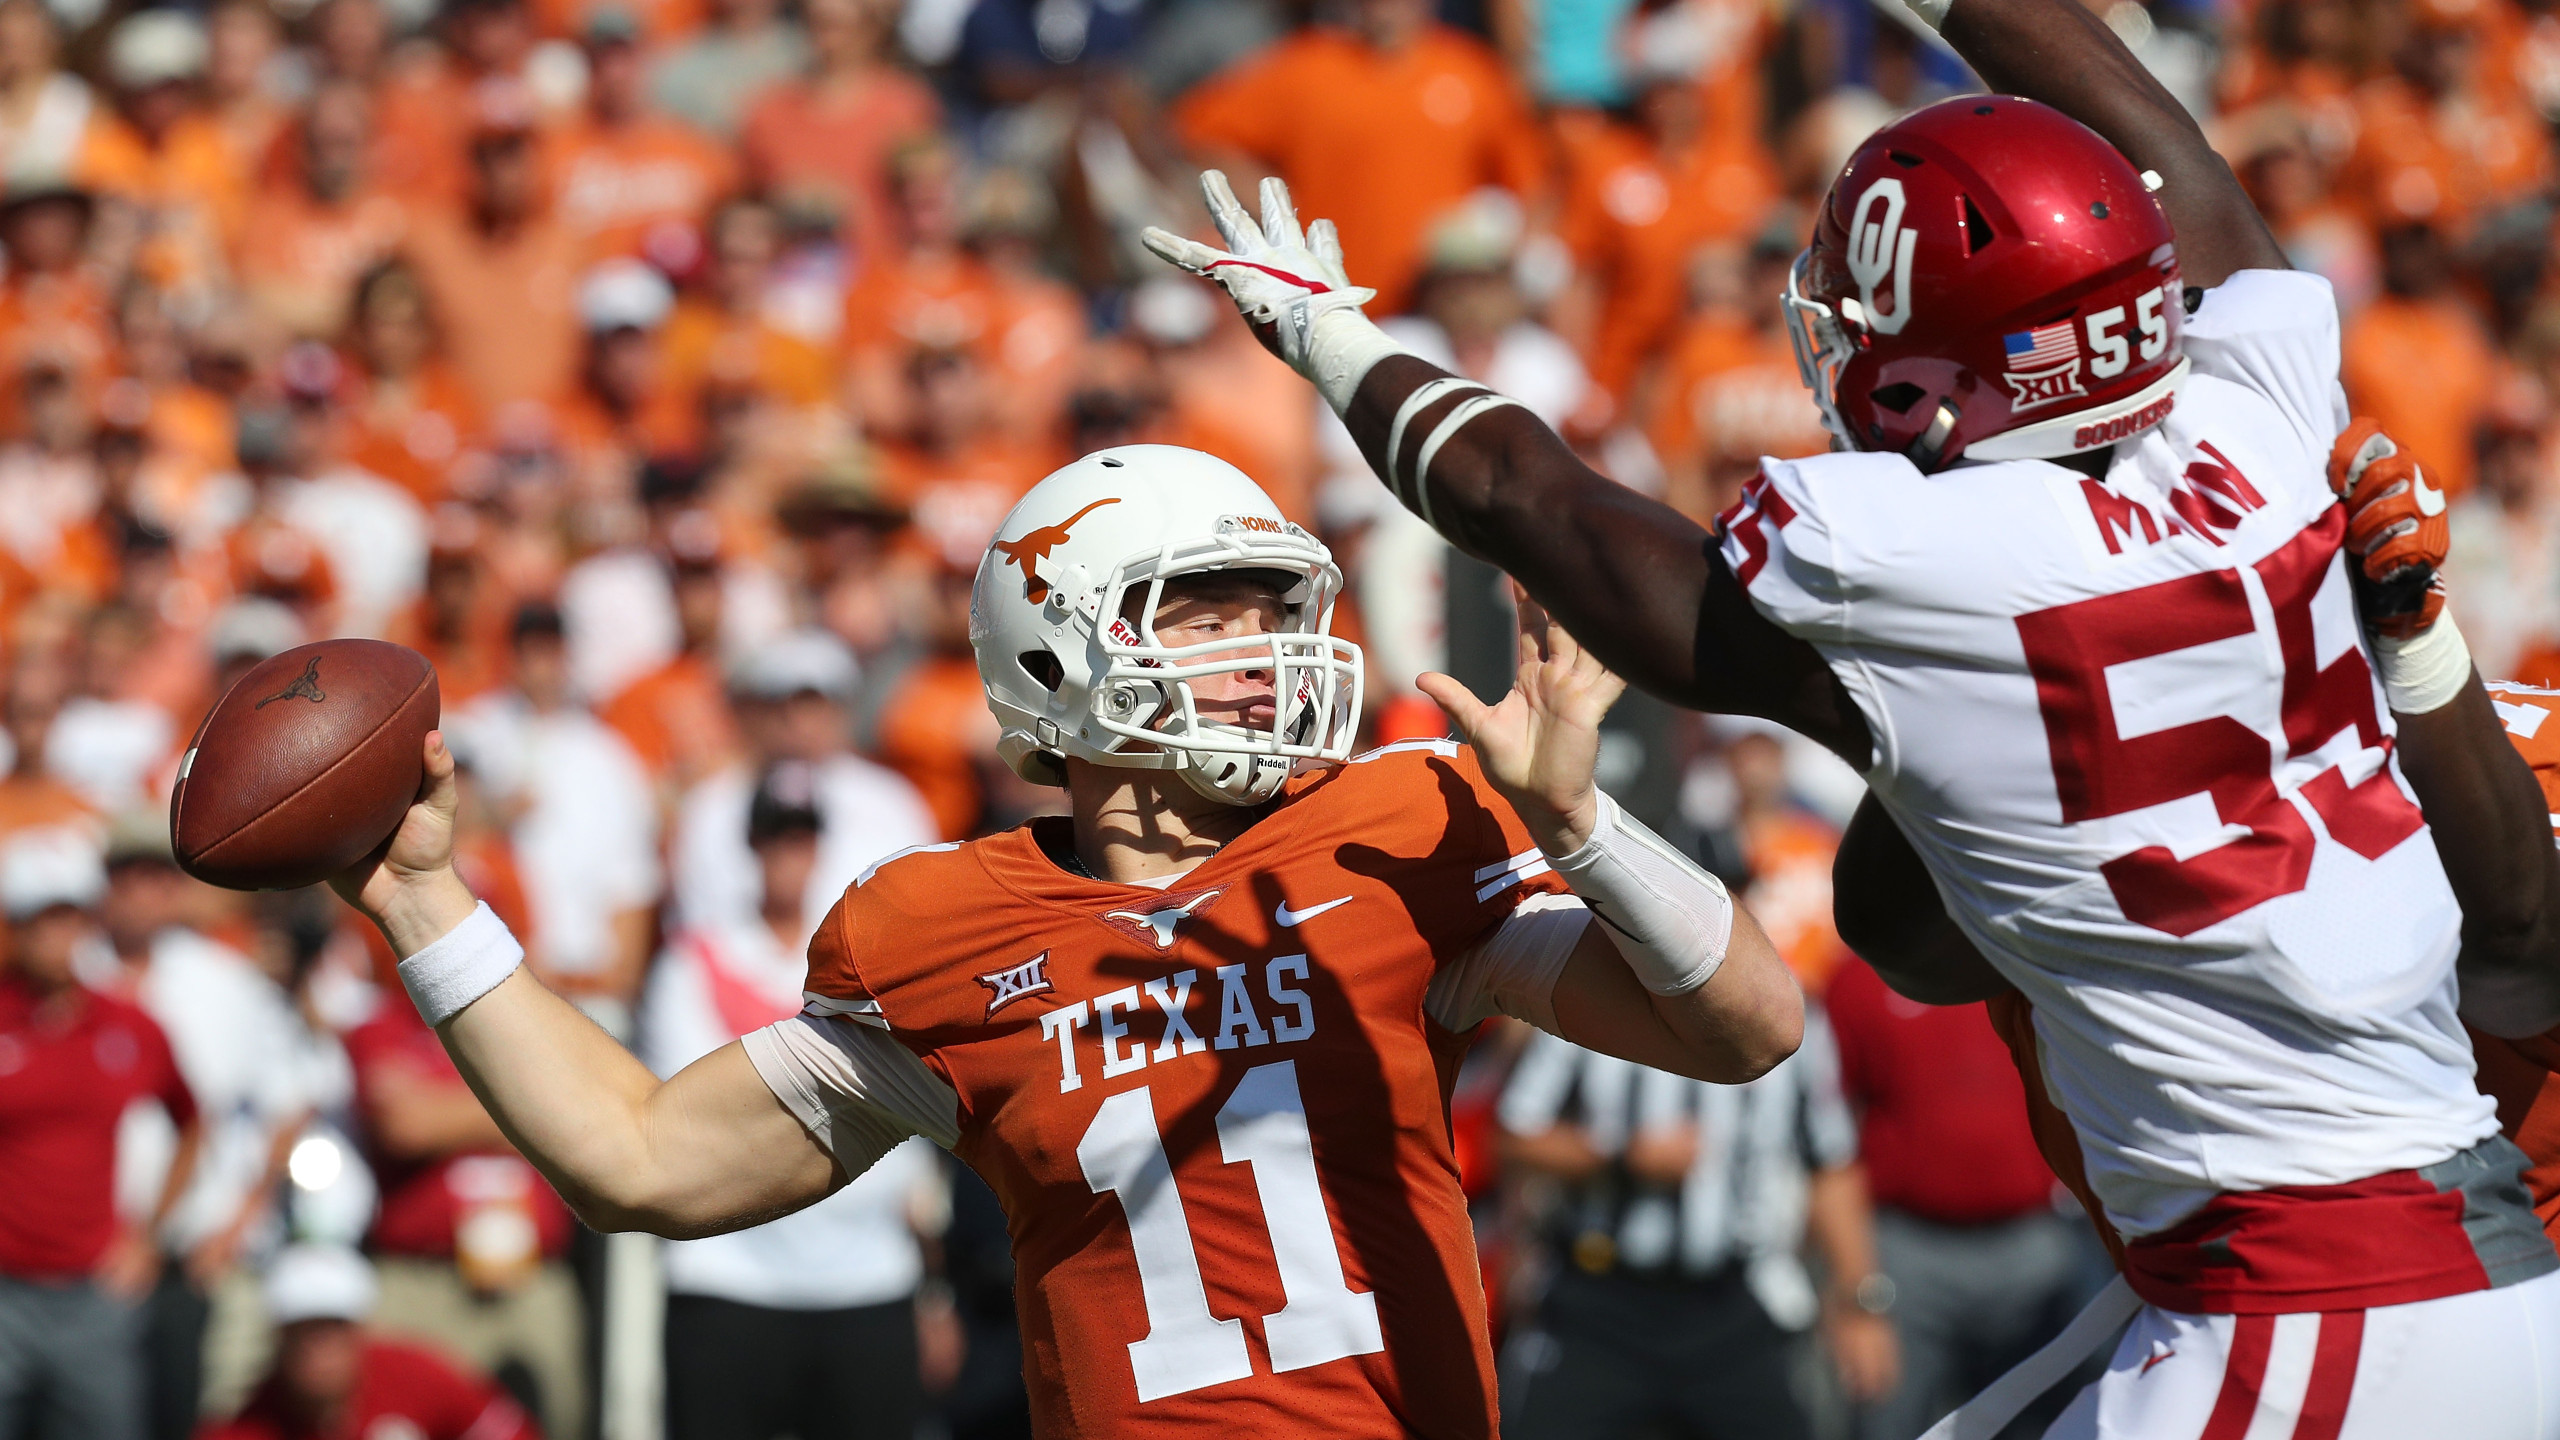 ROUNDTABLE: How Does Texas and Oklahoma Exiting Big XII Affect G5 and FCS?